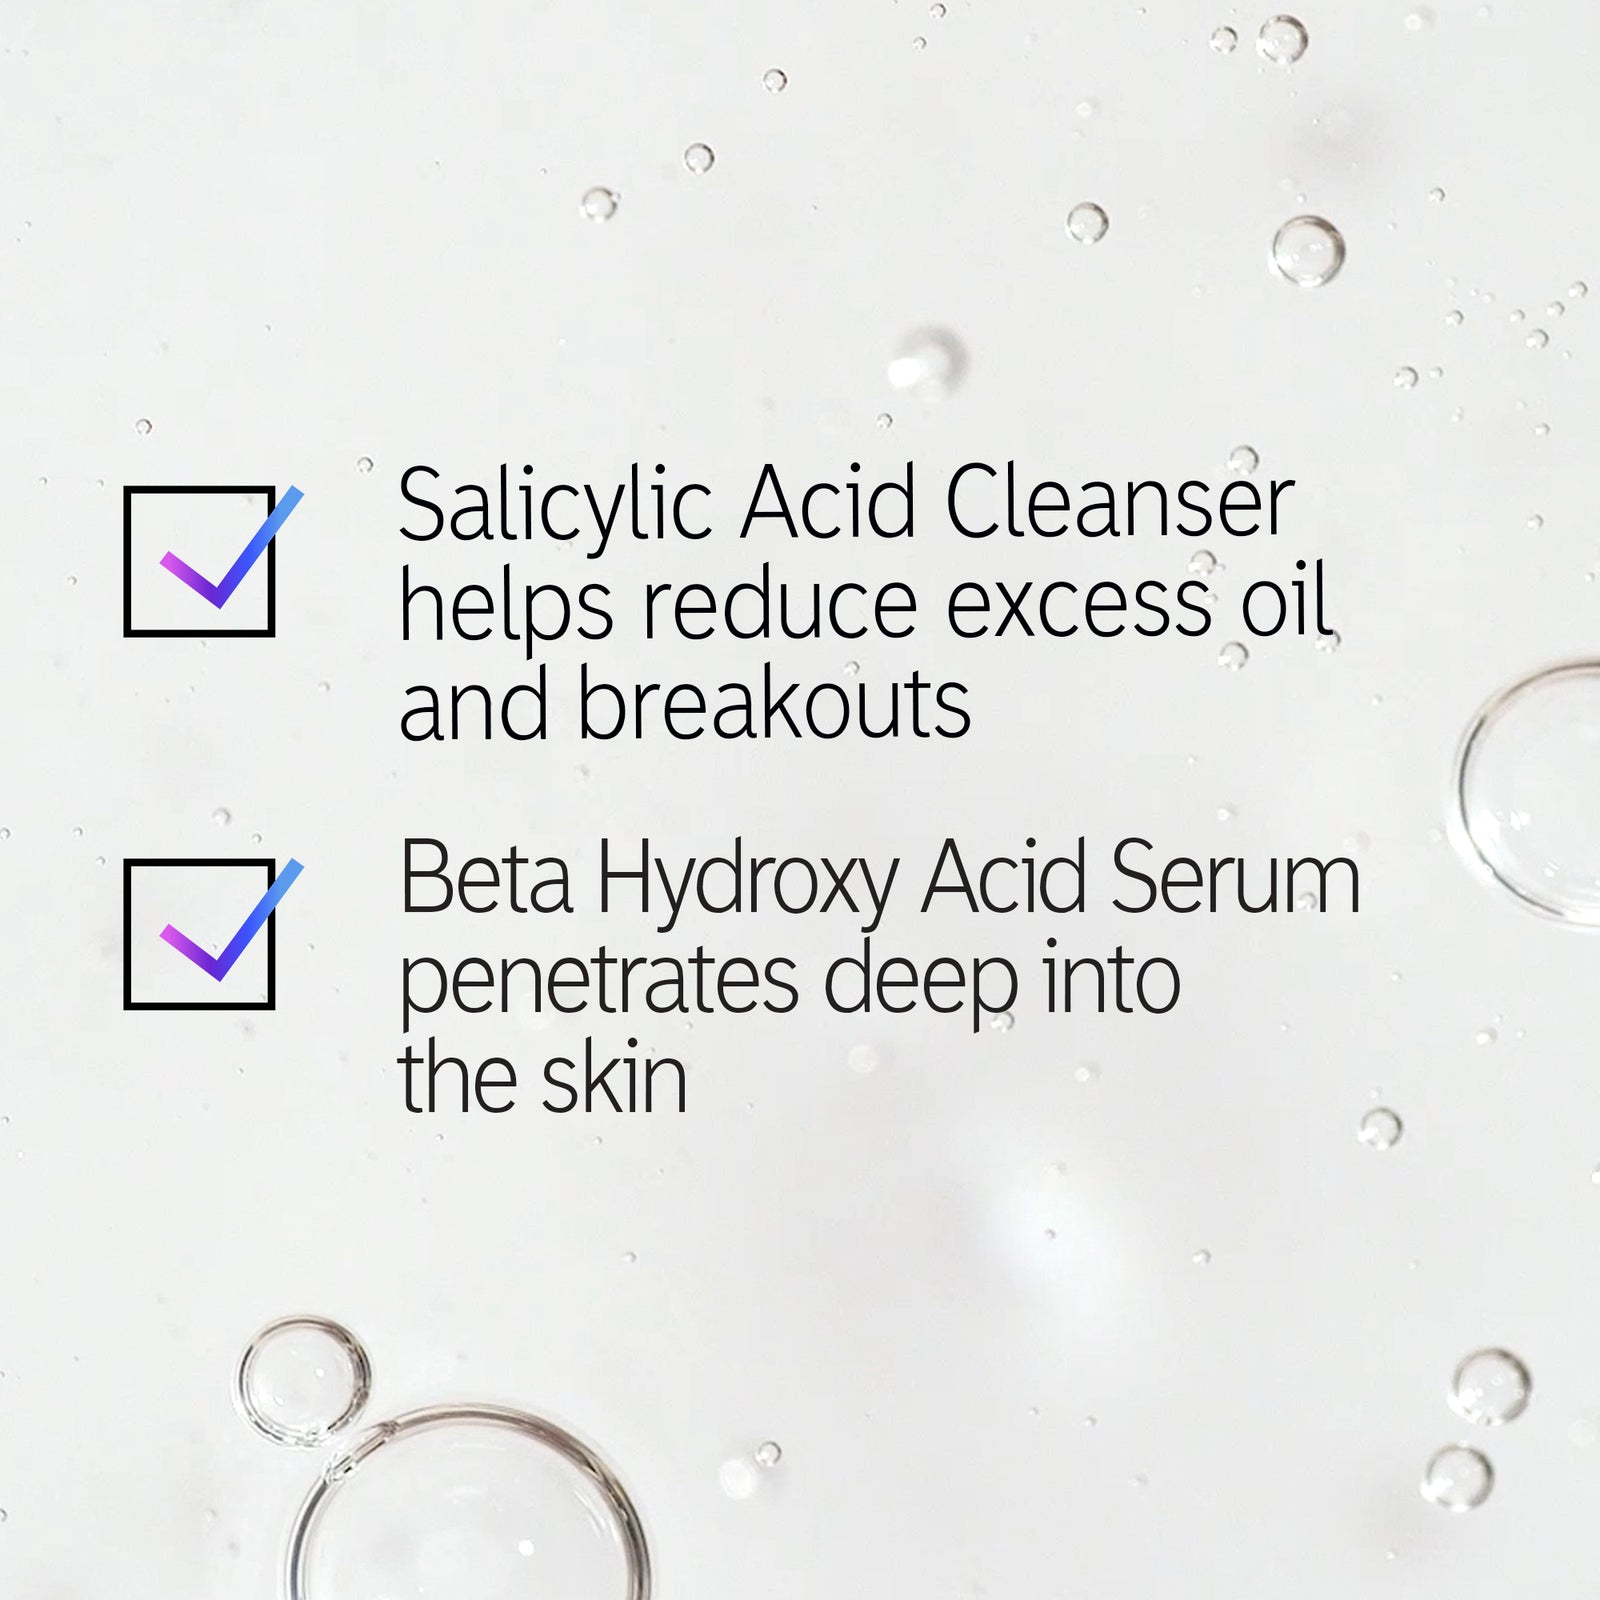 Deep Cleanse Duo ingredient checklist overlay on a goop texture shot